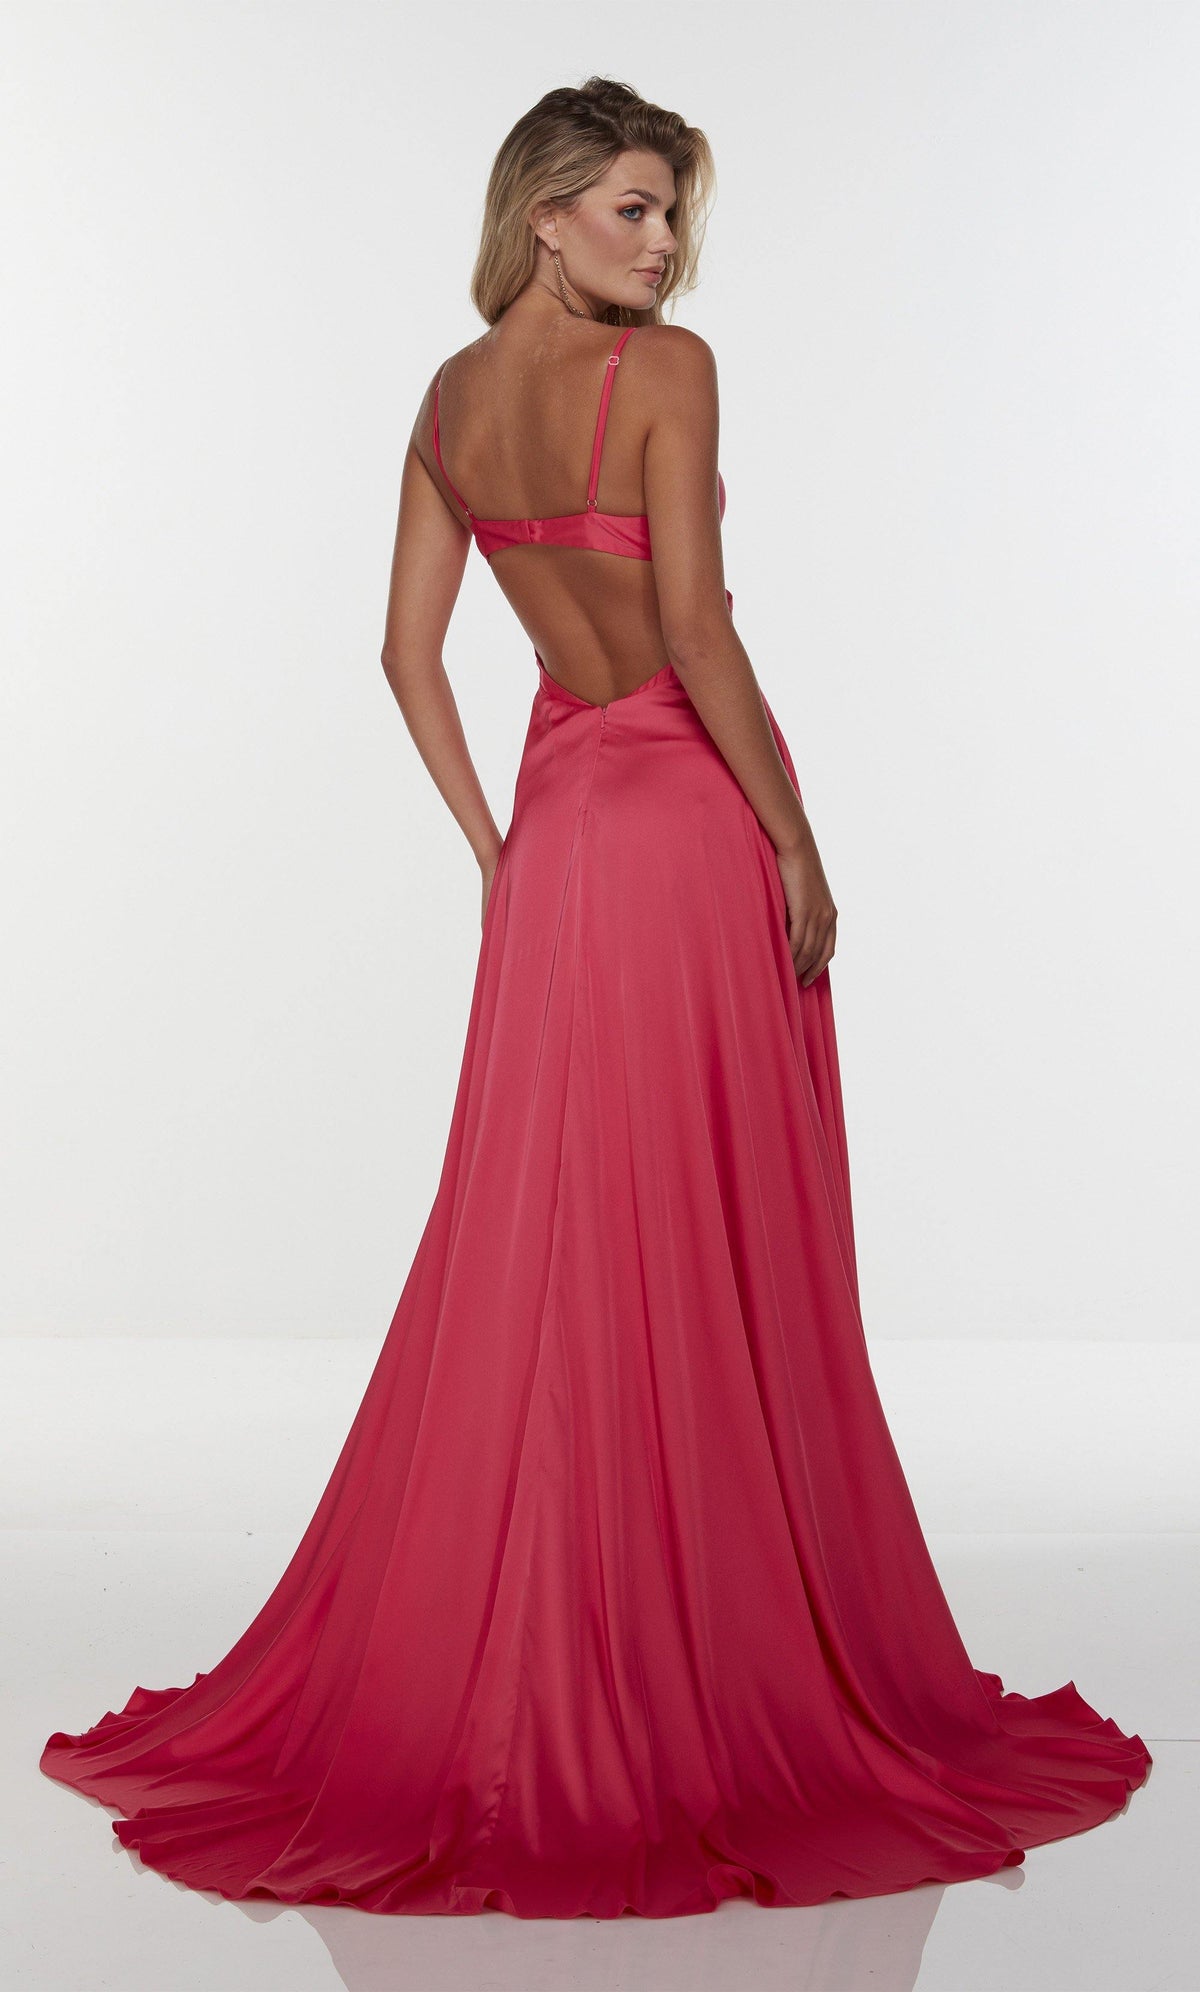 Long satin open back dress with a flowy skirt and train.